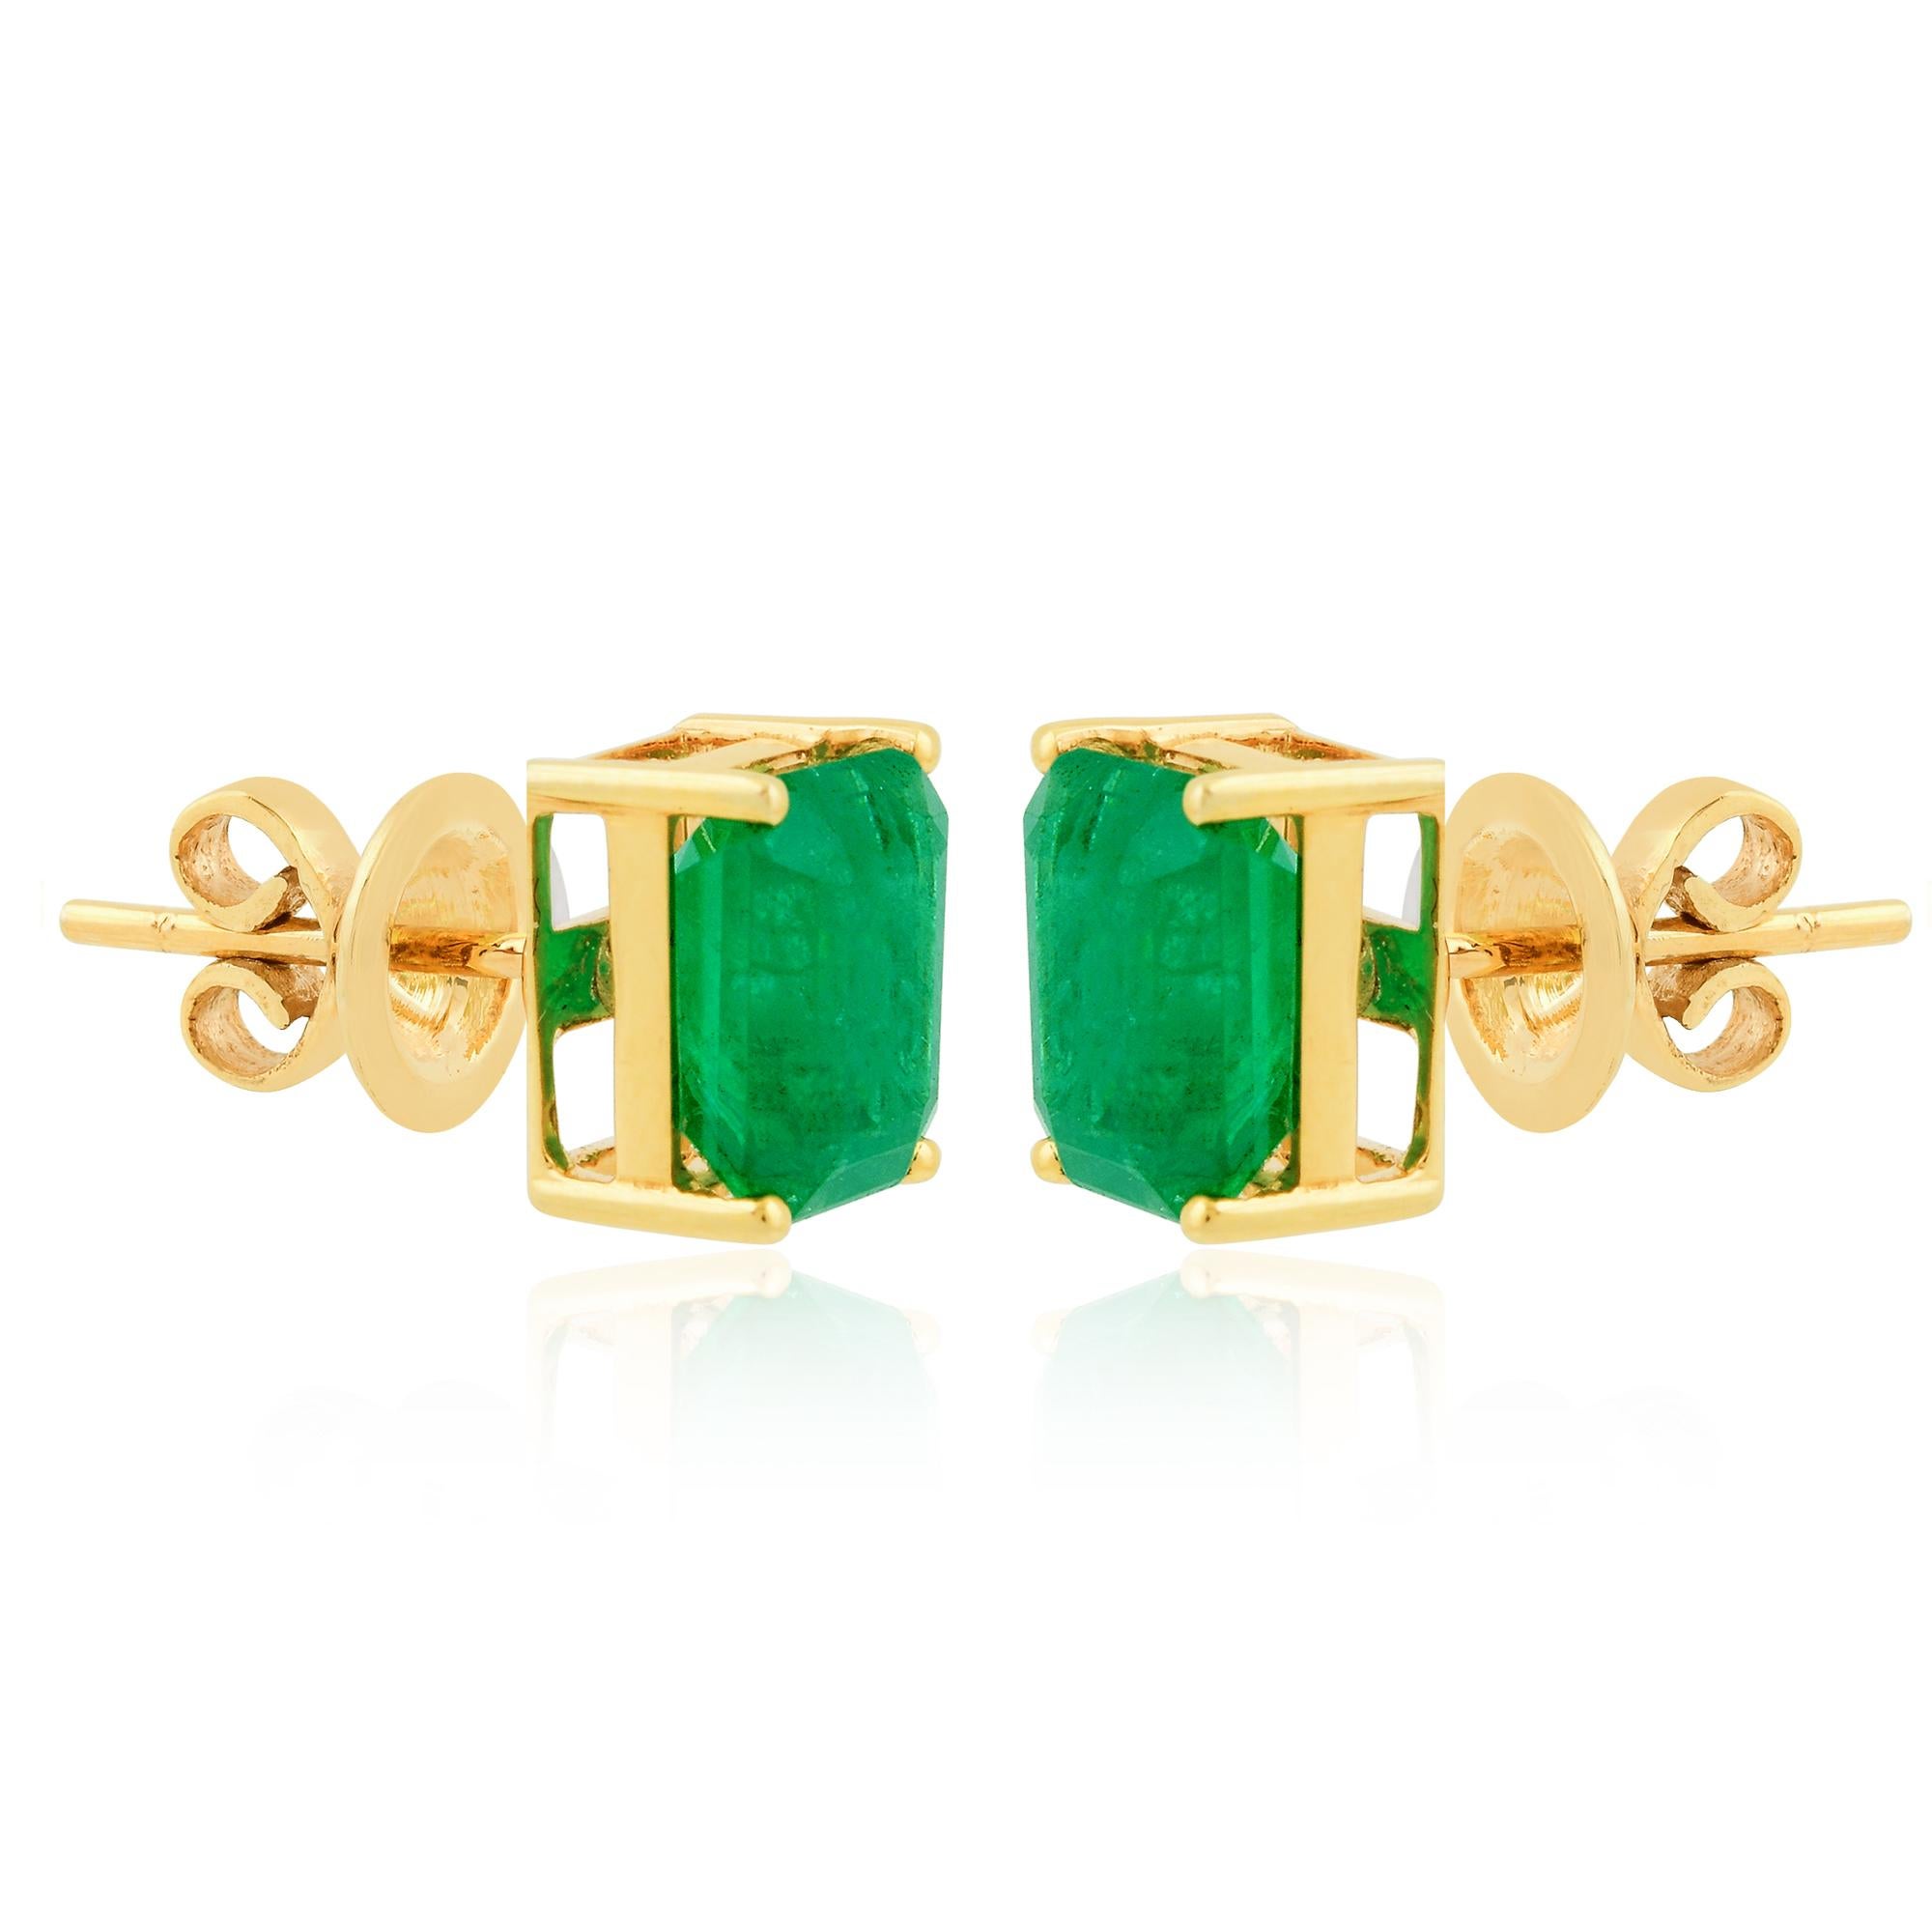 Women's Real 4 Carat Natural Emerald Gemstone Stud Earrings 18k Yellow Gold Fine Jewelry For Sale